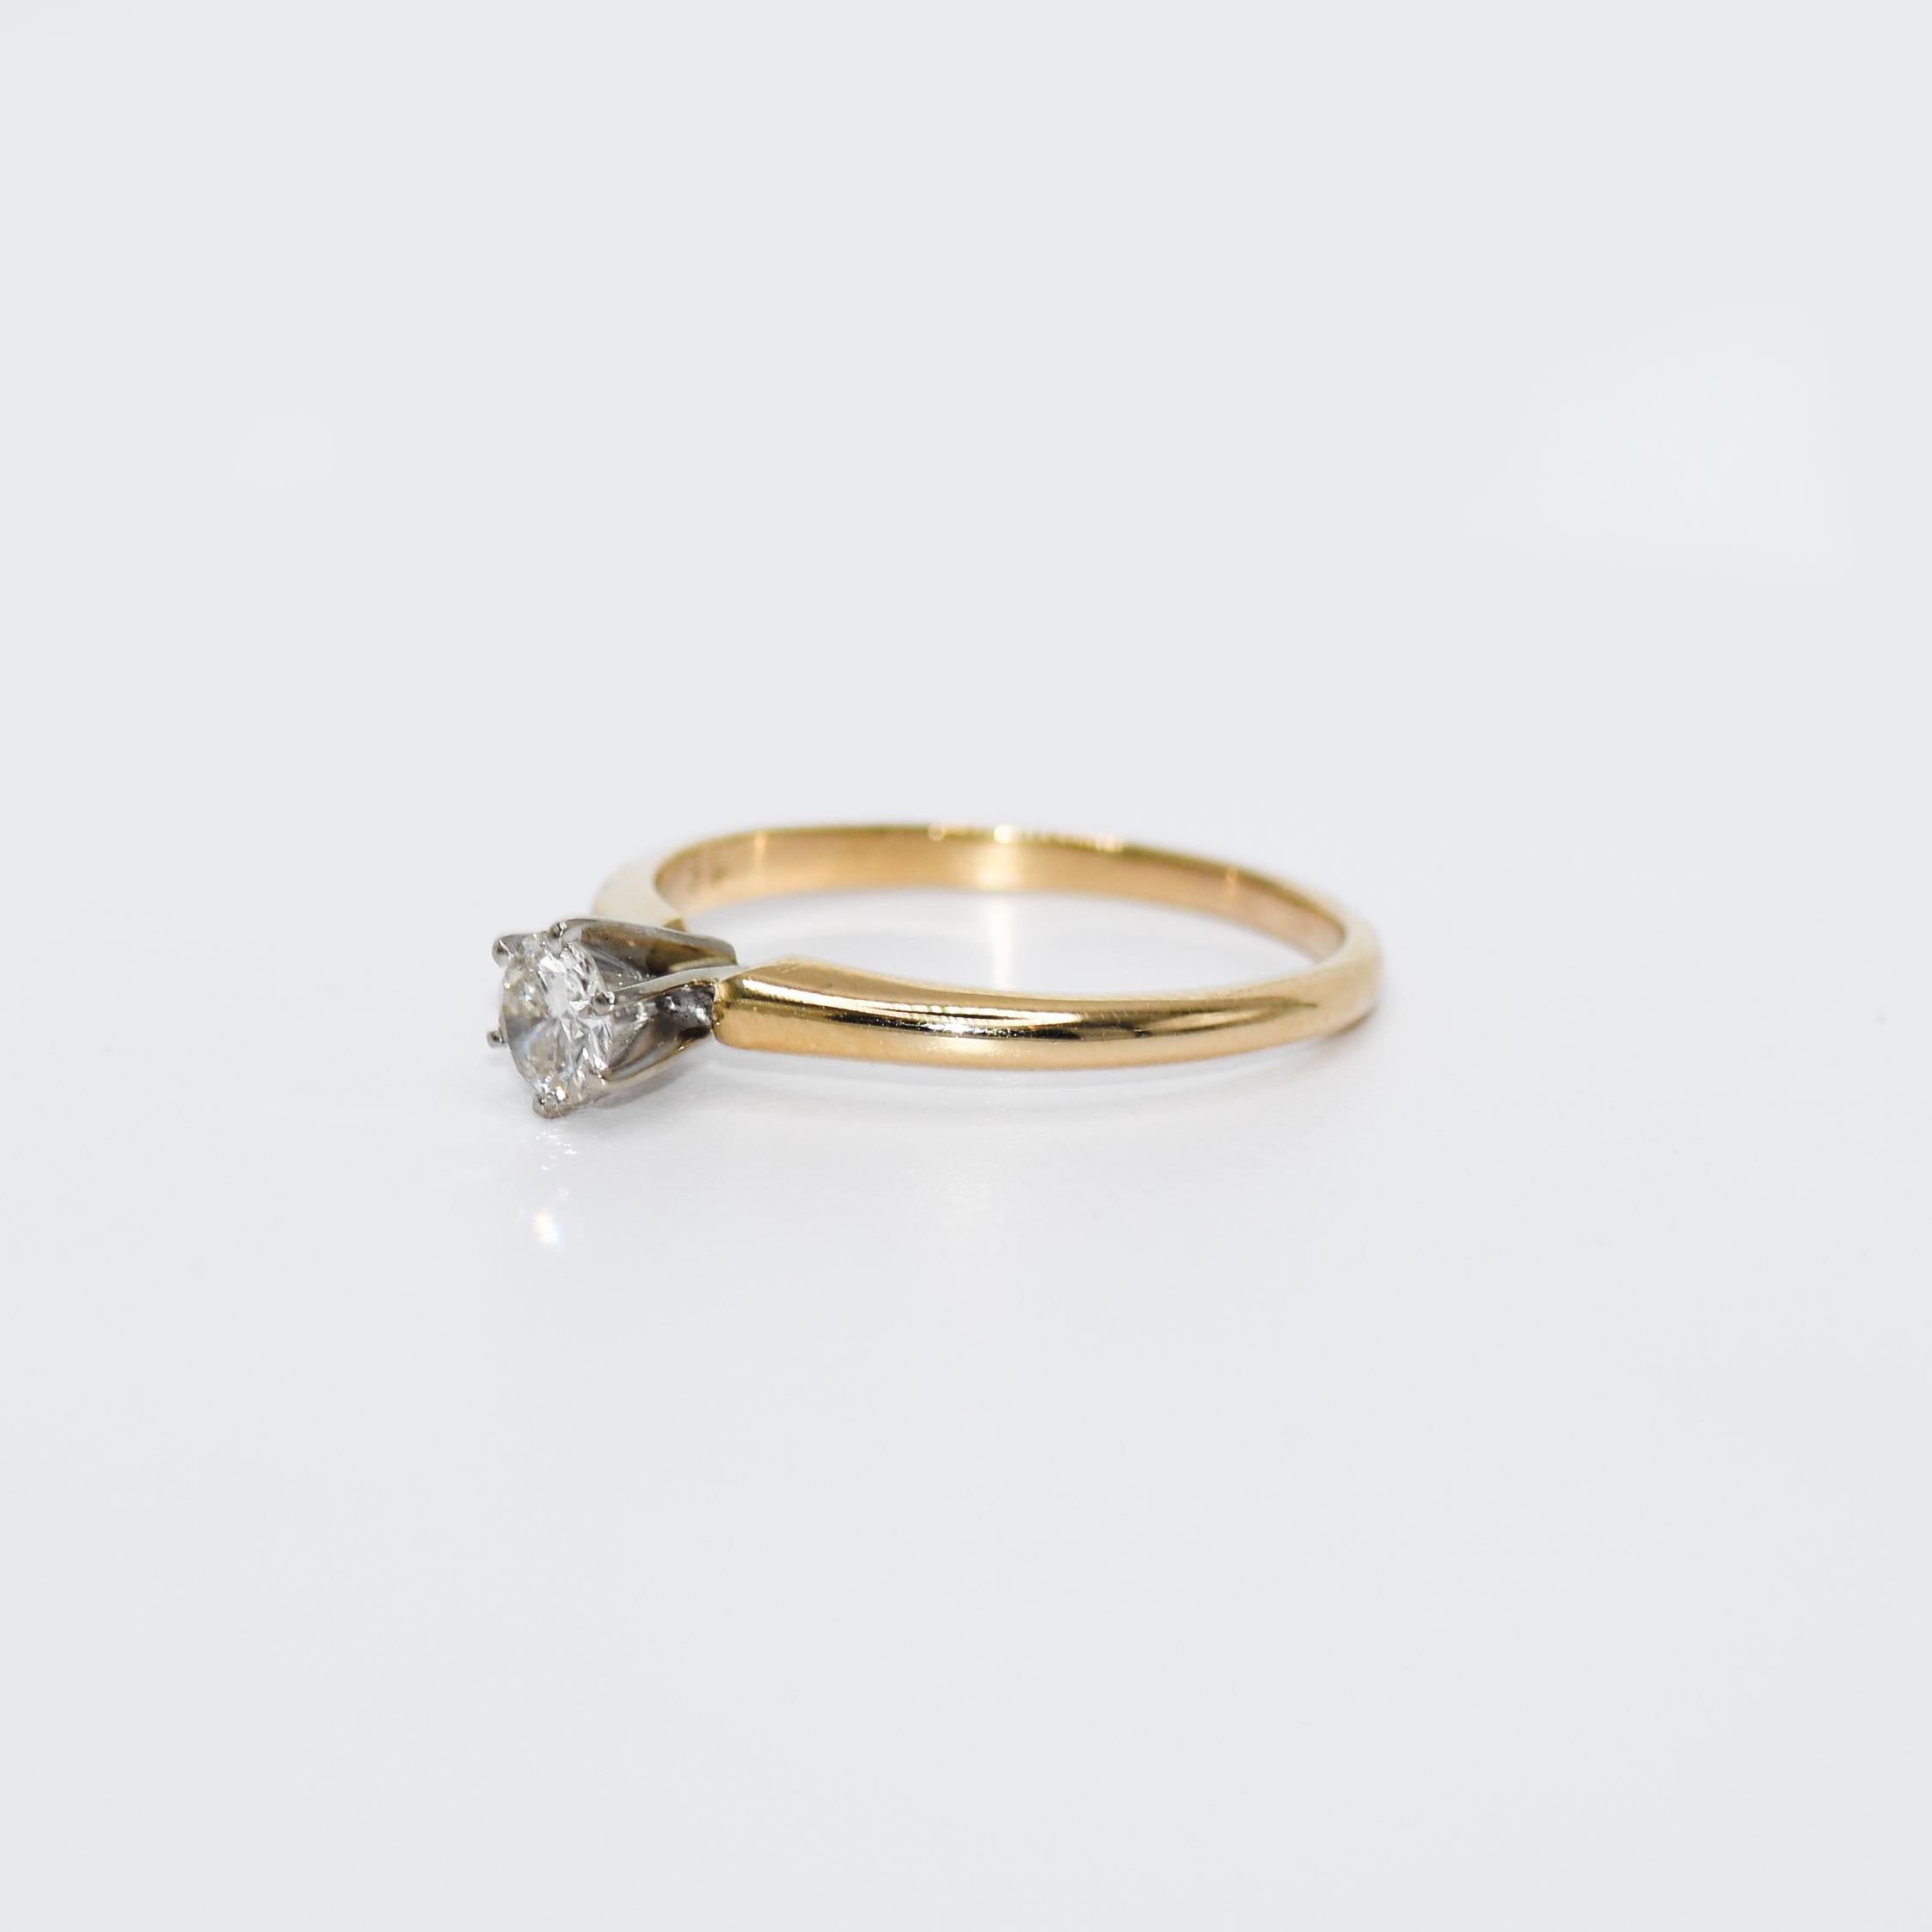 14k Yellow Gold Solitaire Diamond Ring, .30ct, 2.4gr In Excellent Condition For Sale In Laguna Beach, CA